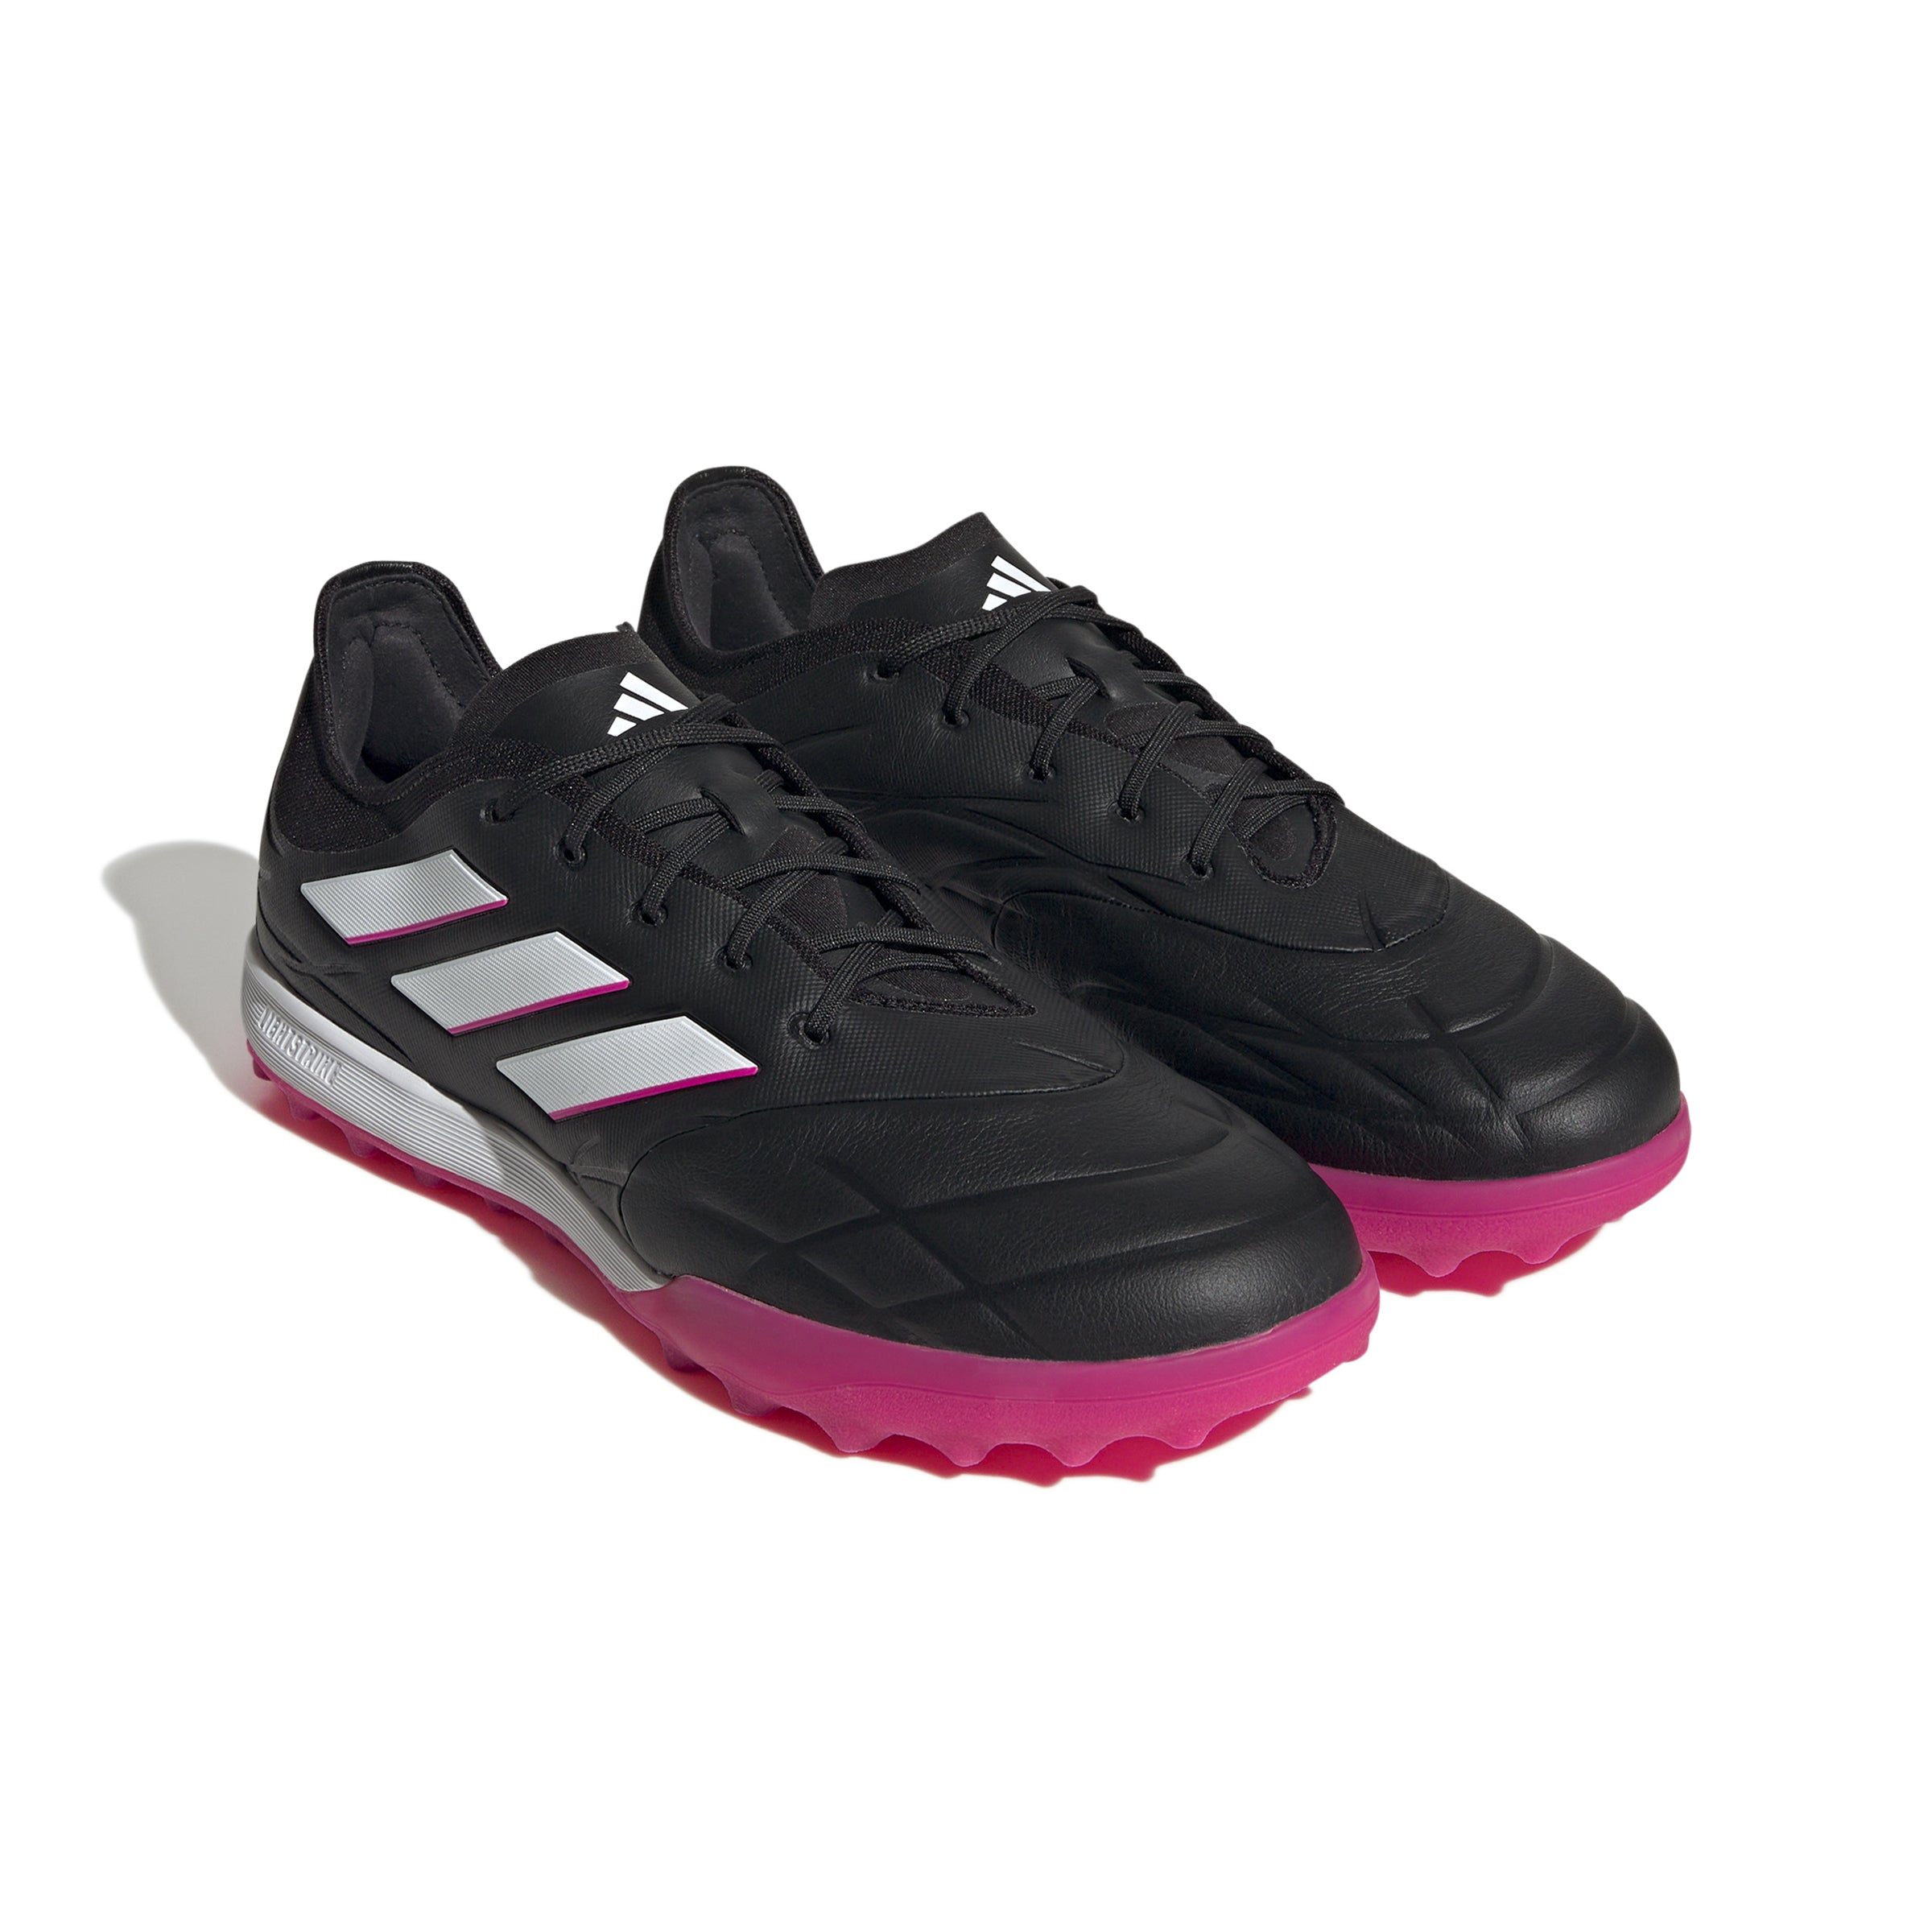 adidas Copa Pure 1. TF Turf Soccer Shoes